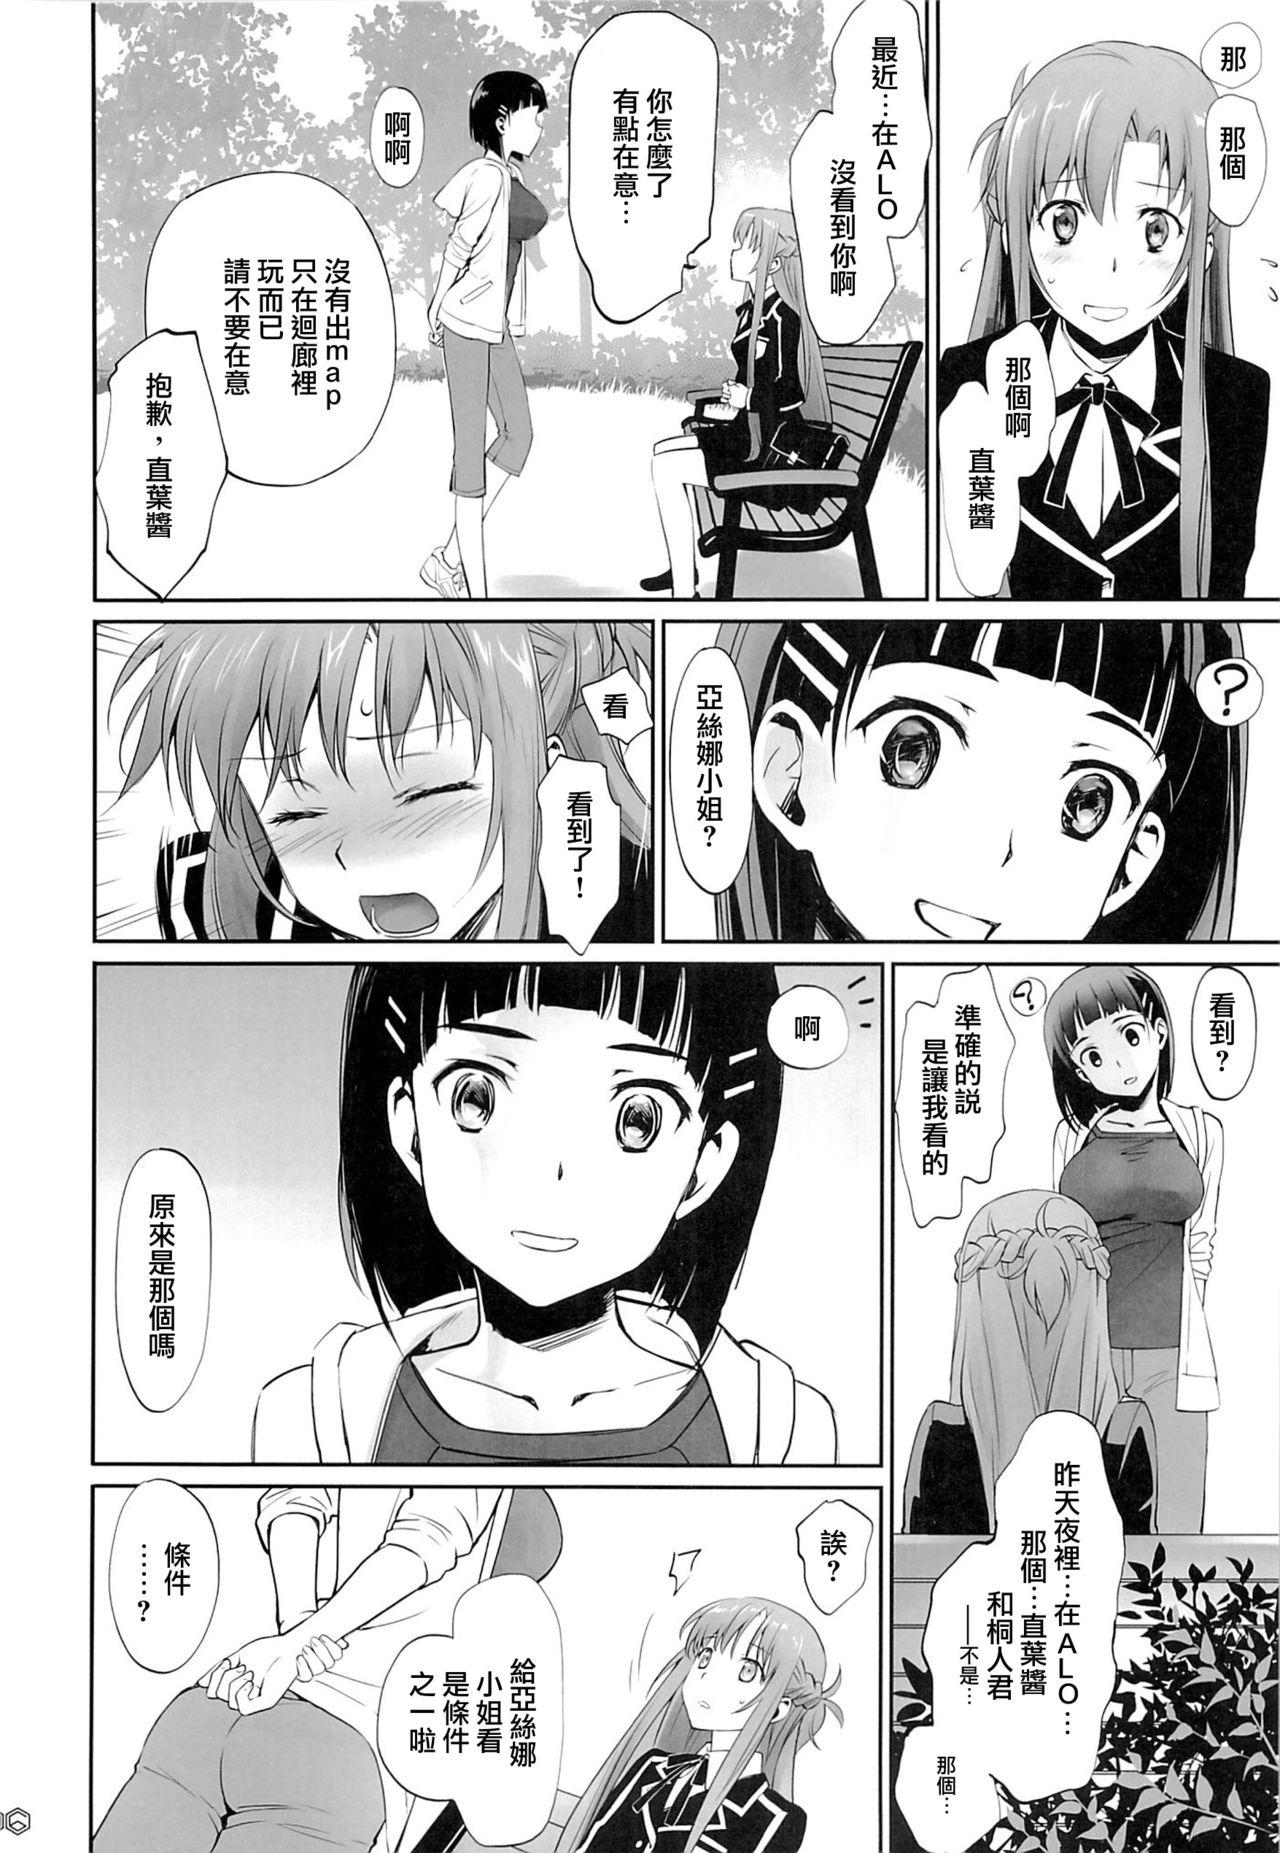 Oldvsyoung turnover - Sword art online Web Cam - Page 5